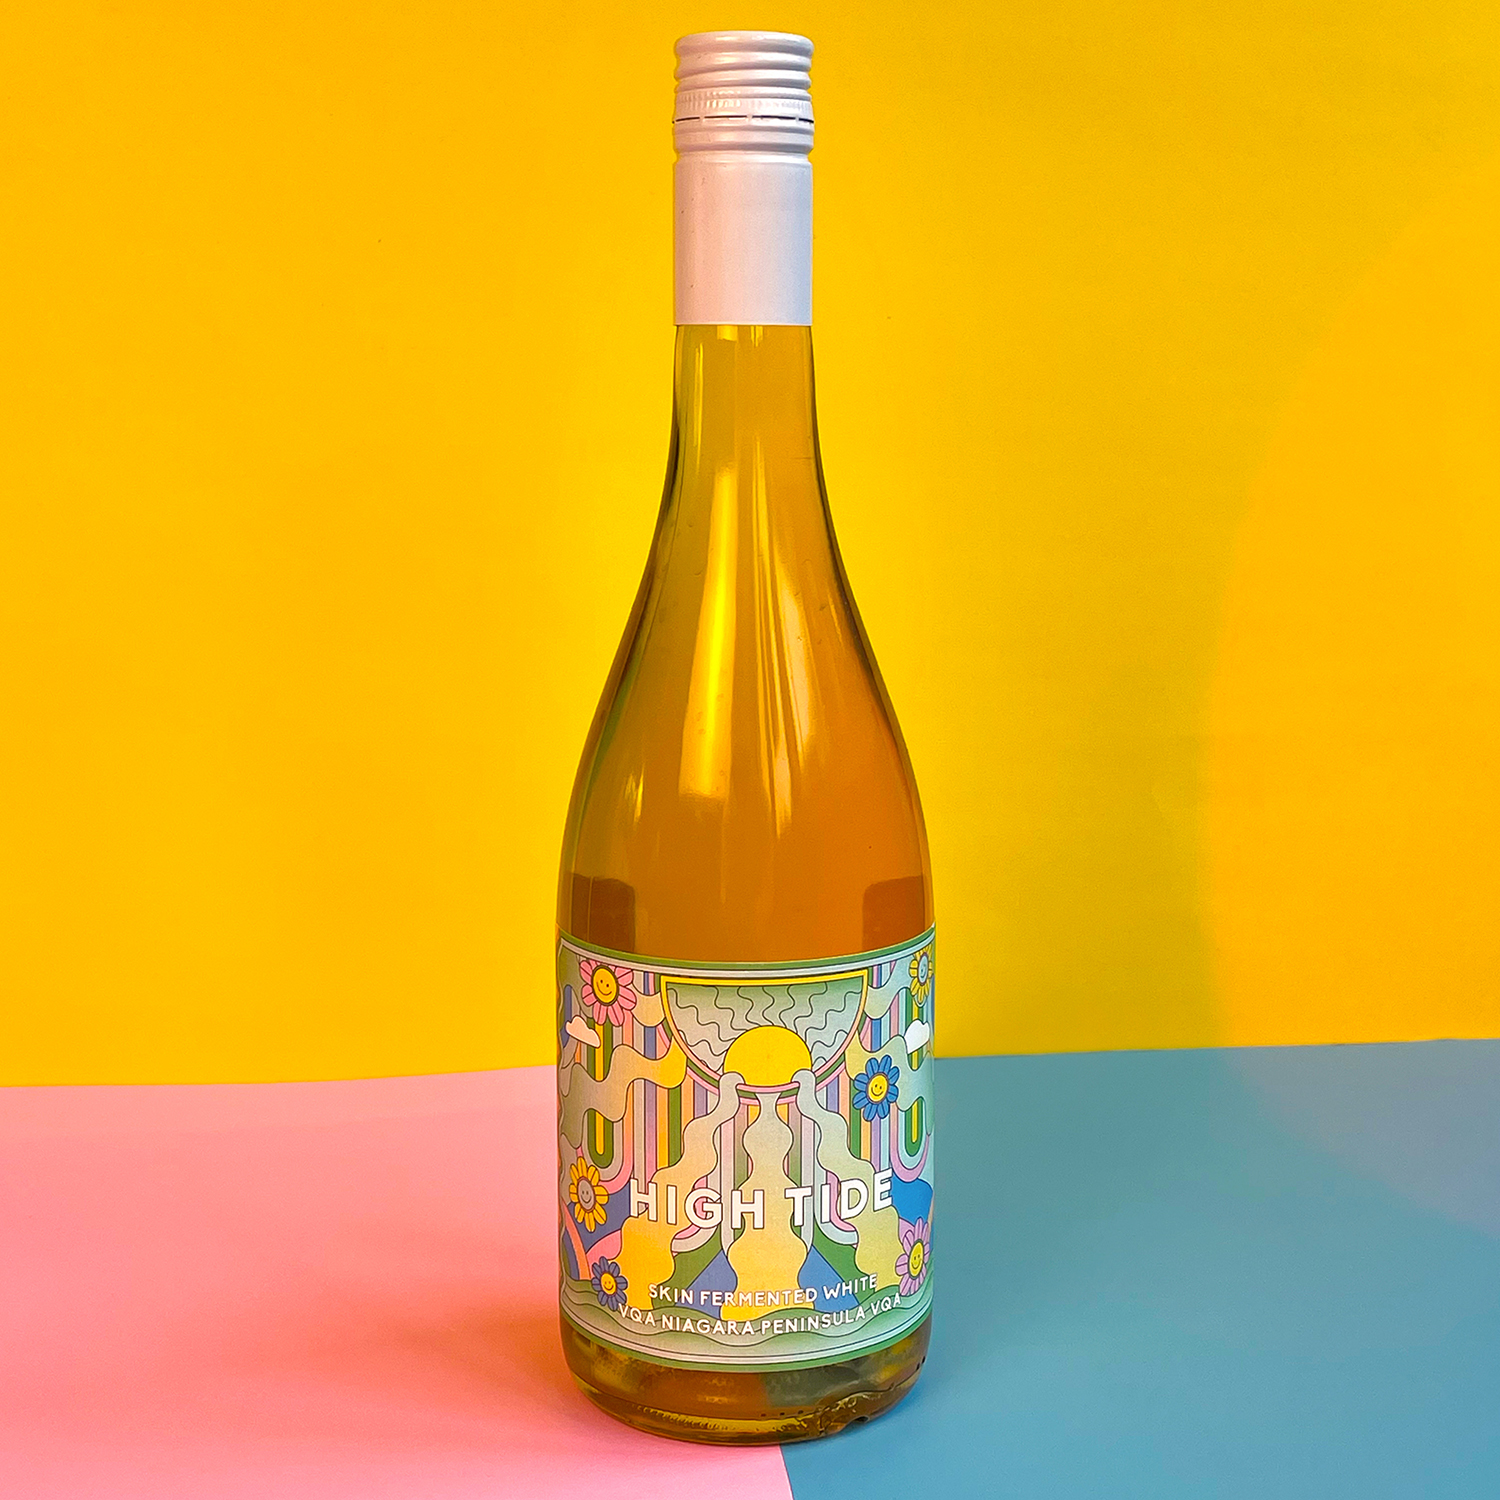 High Tide Wine Label against yellow background and pink and blue table top.Photo by Ray Tran.